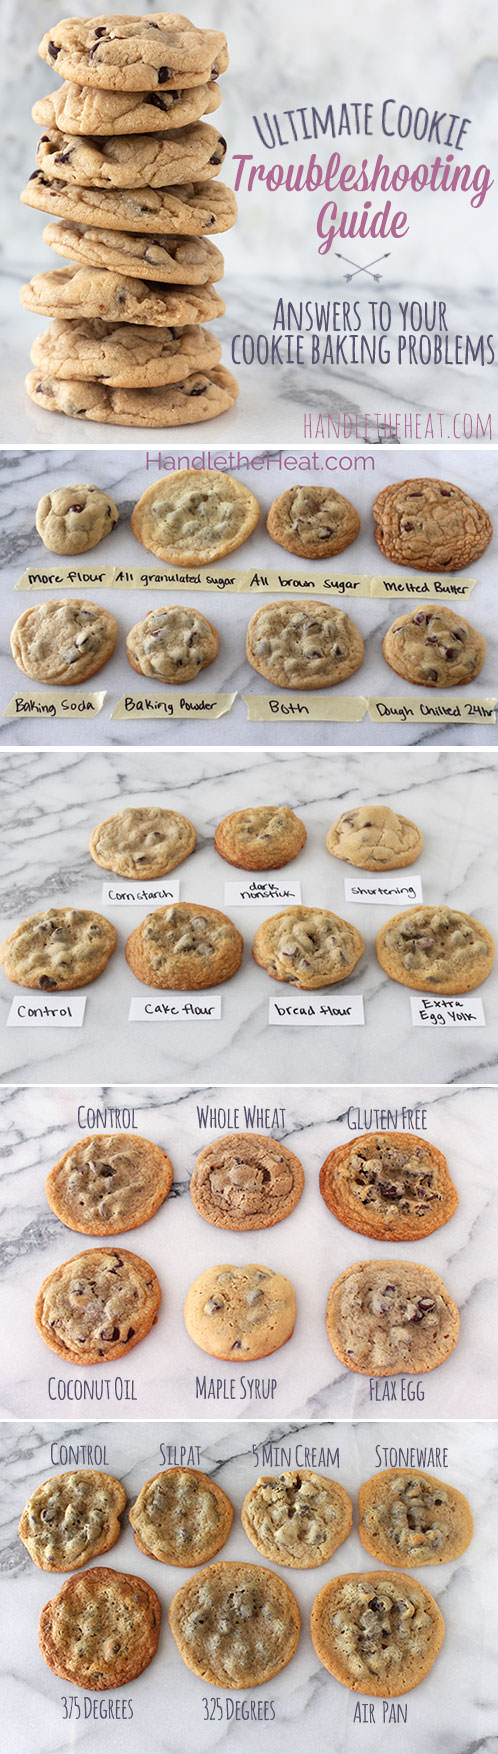 Ultimate-Cookie-Troubleshooting-Guide-Collage-Correct